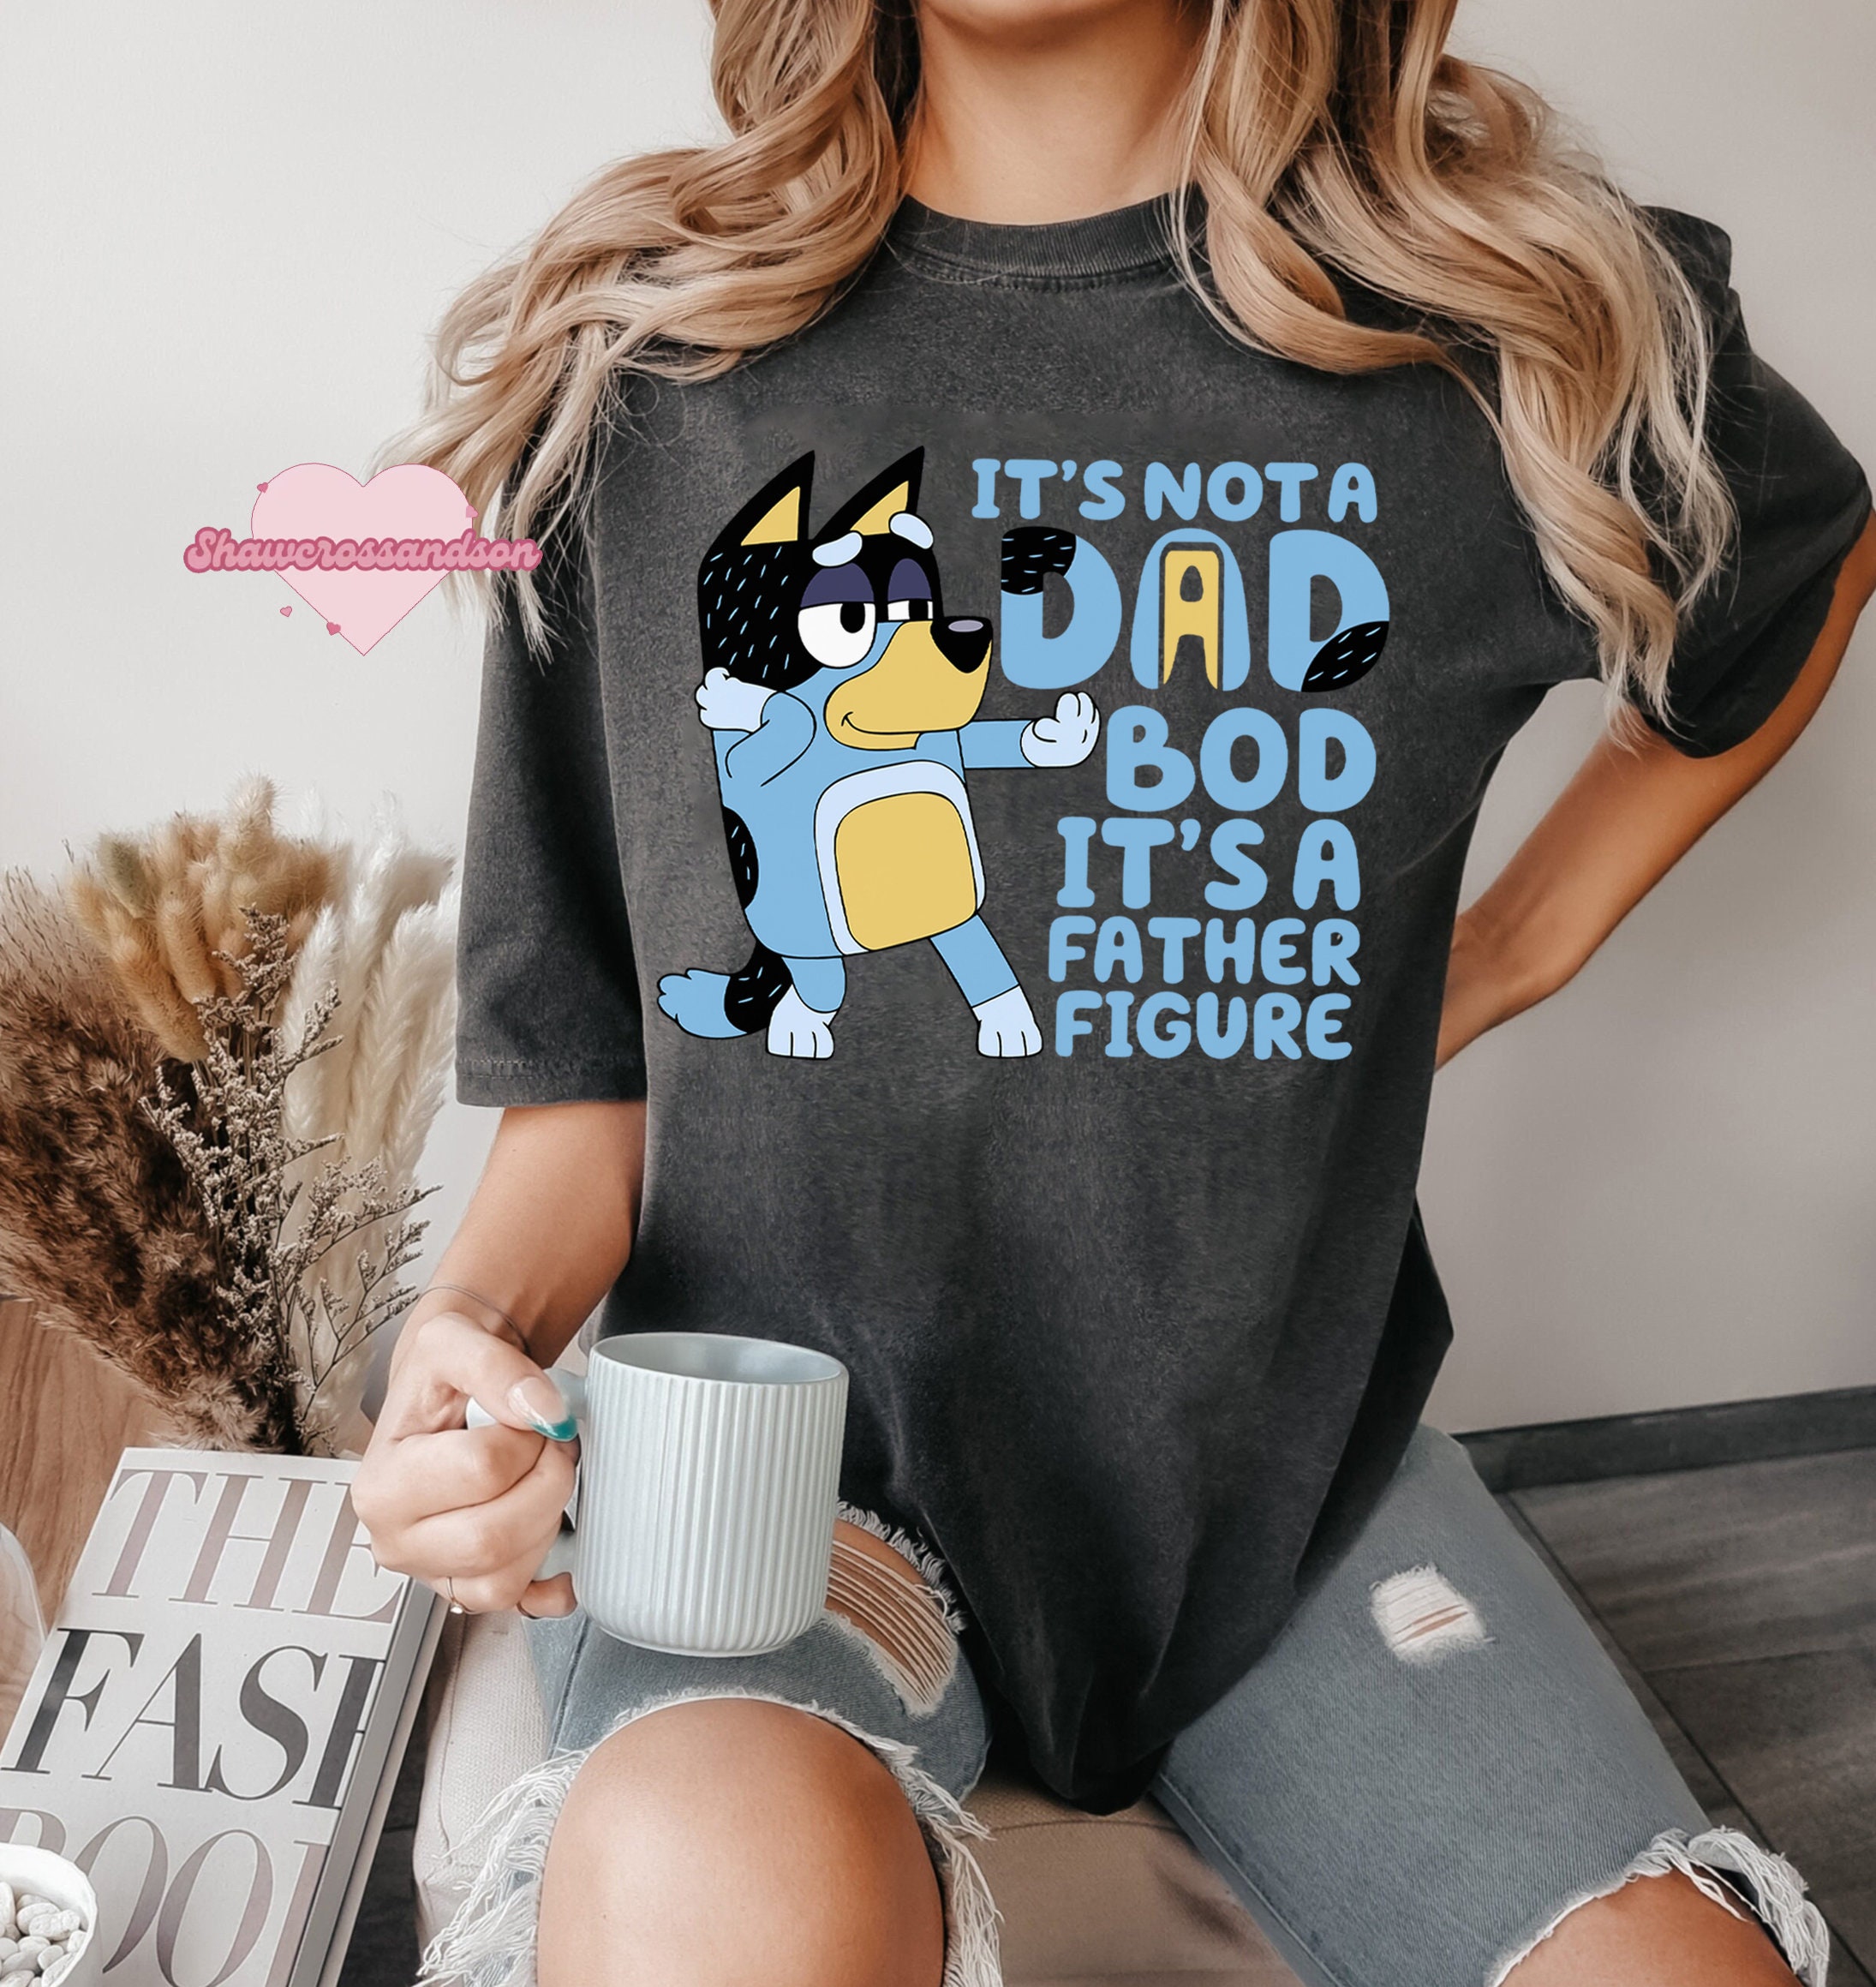 It's Not A Dad Bod It's A Father Figure, Bluey Dad T-Shirt - Printing Ooze